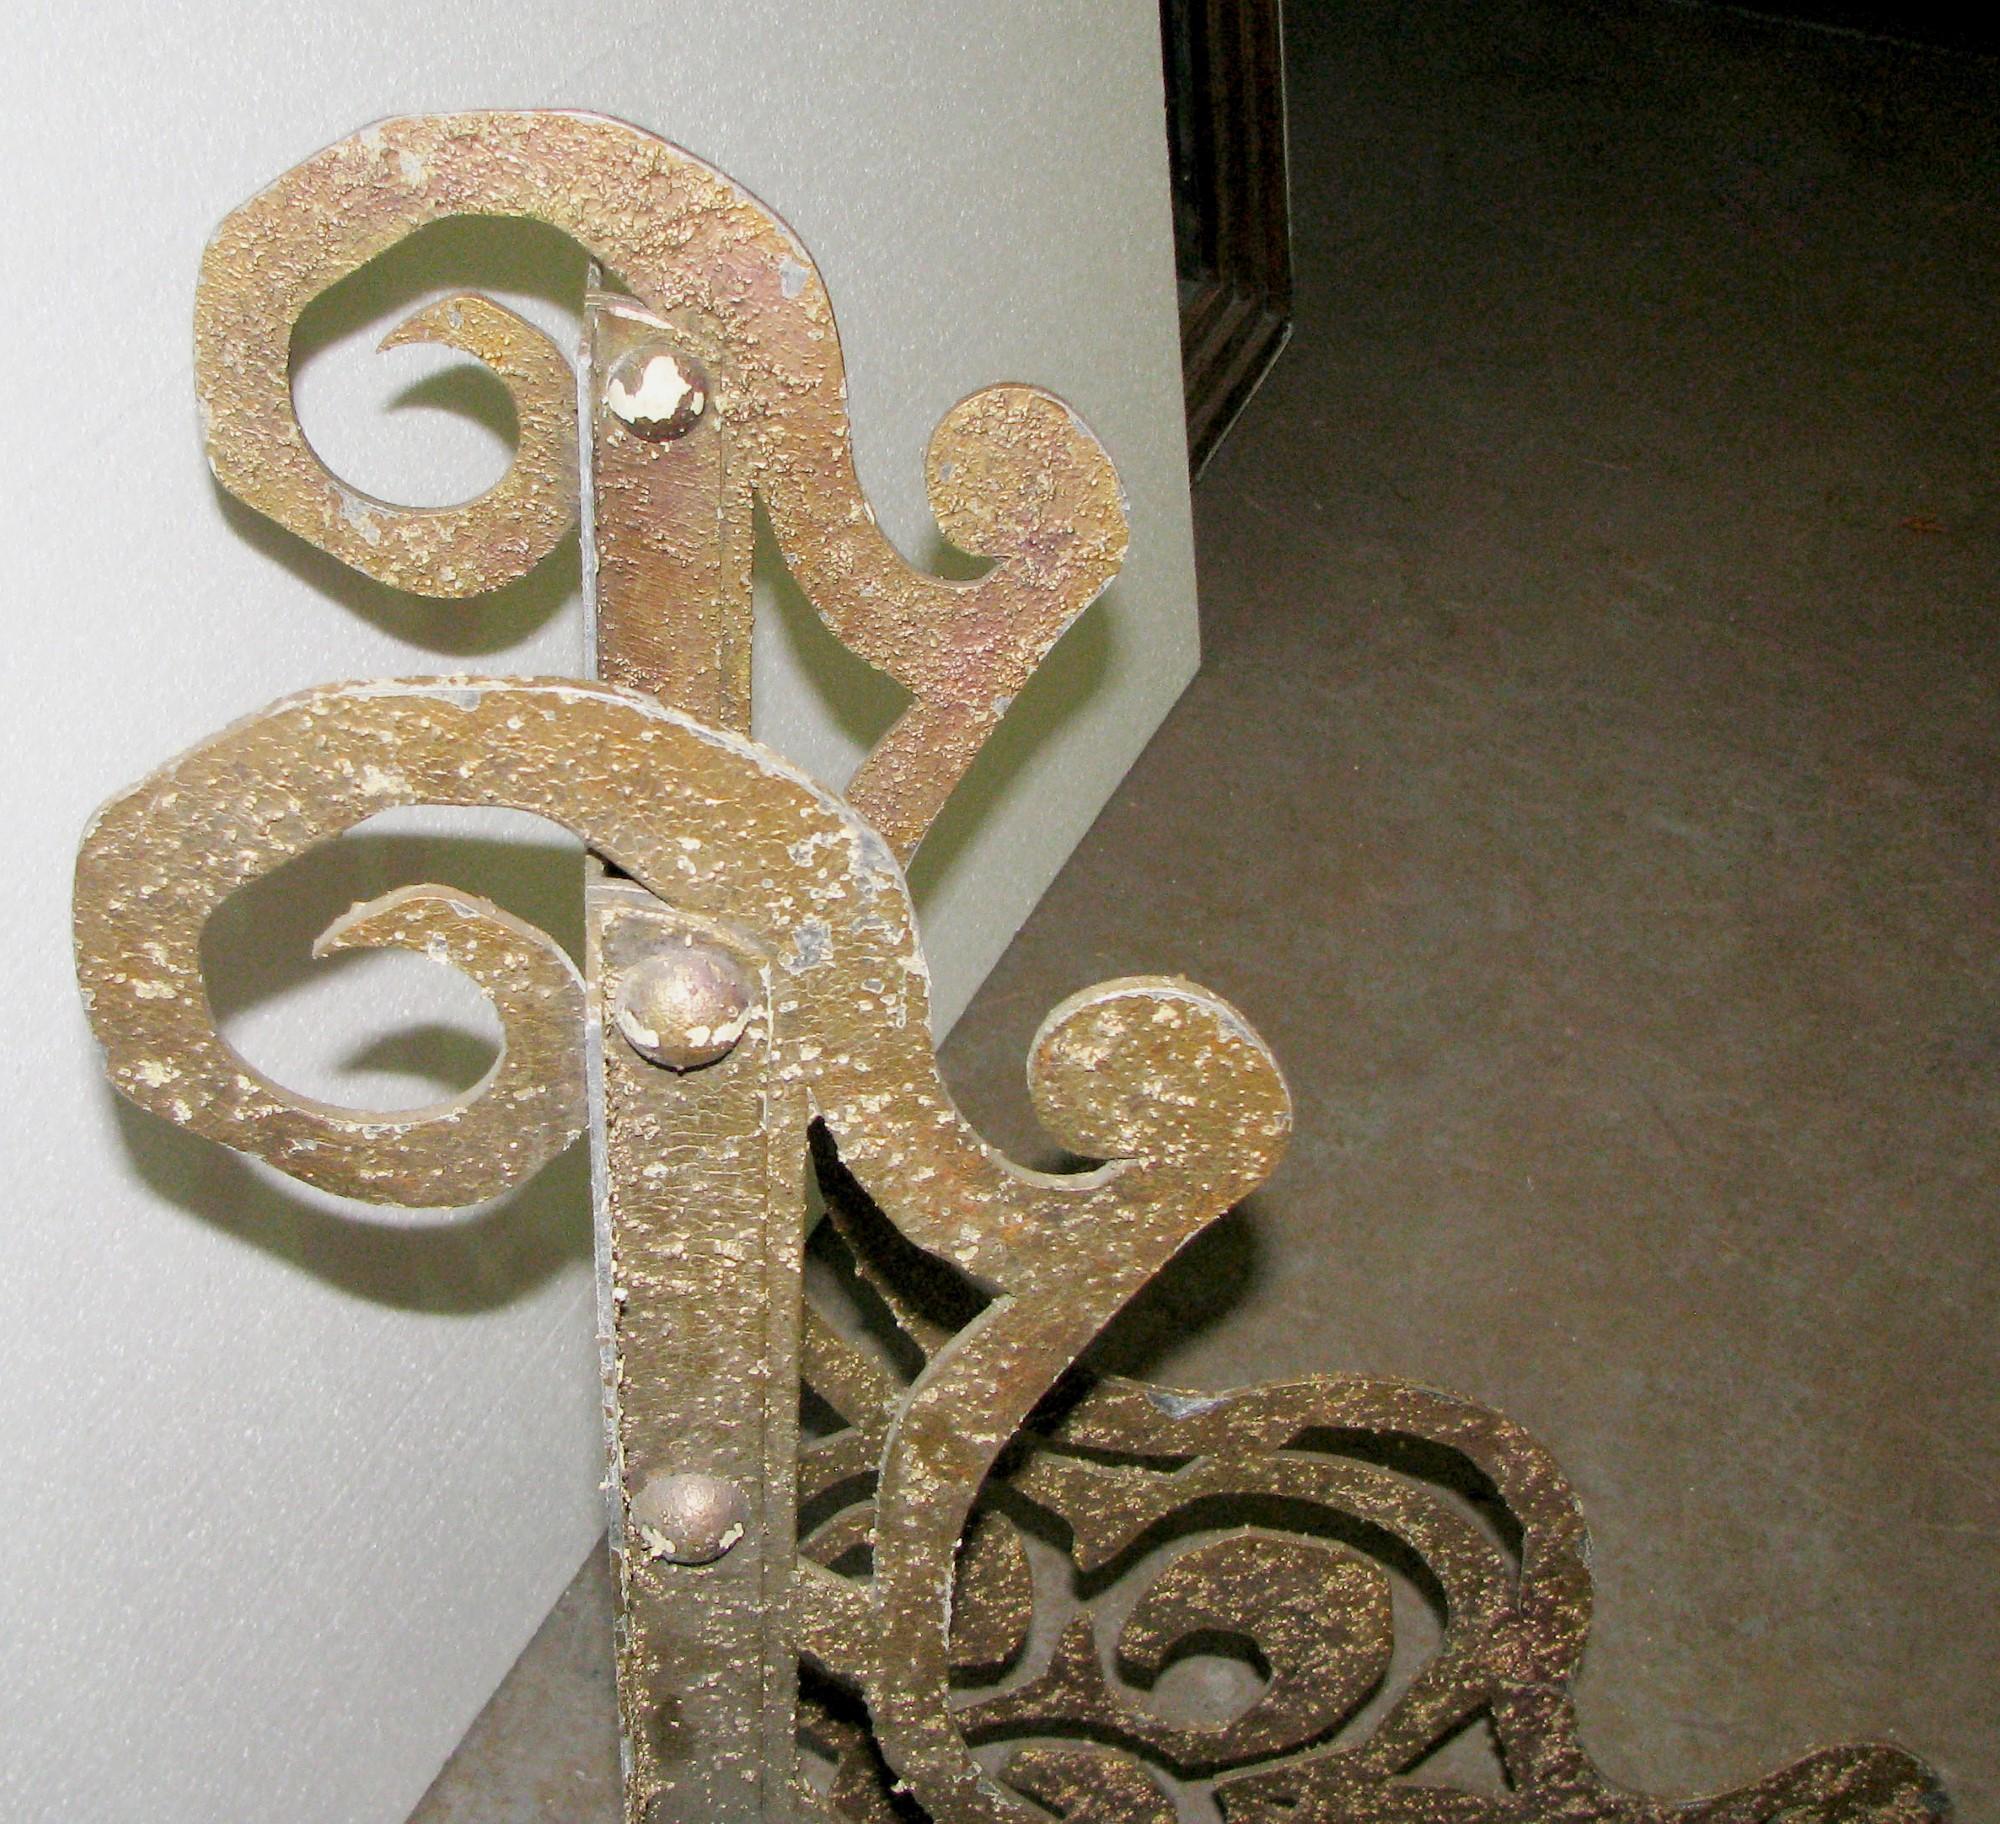 19th Century 1890s Pair of Ornate Architectural Steel Brackets from Manhattan Fire Escape